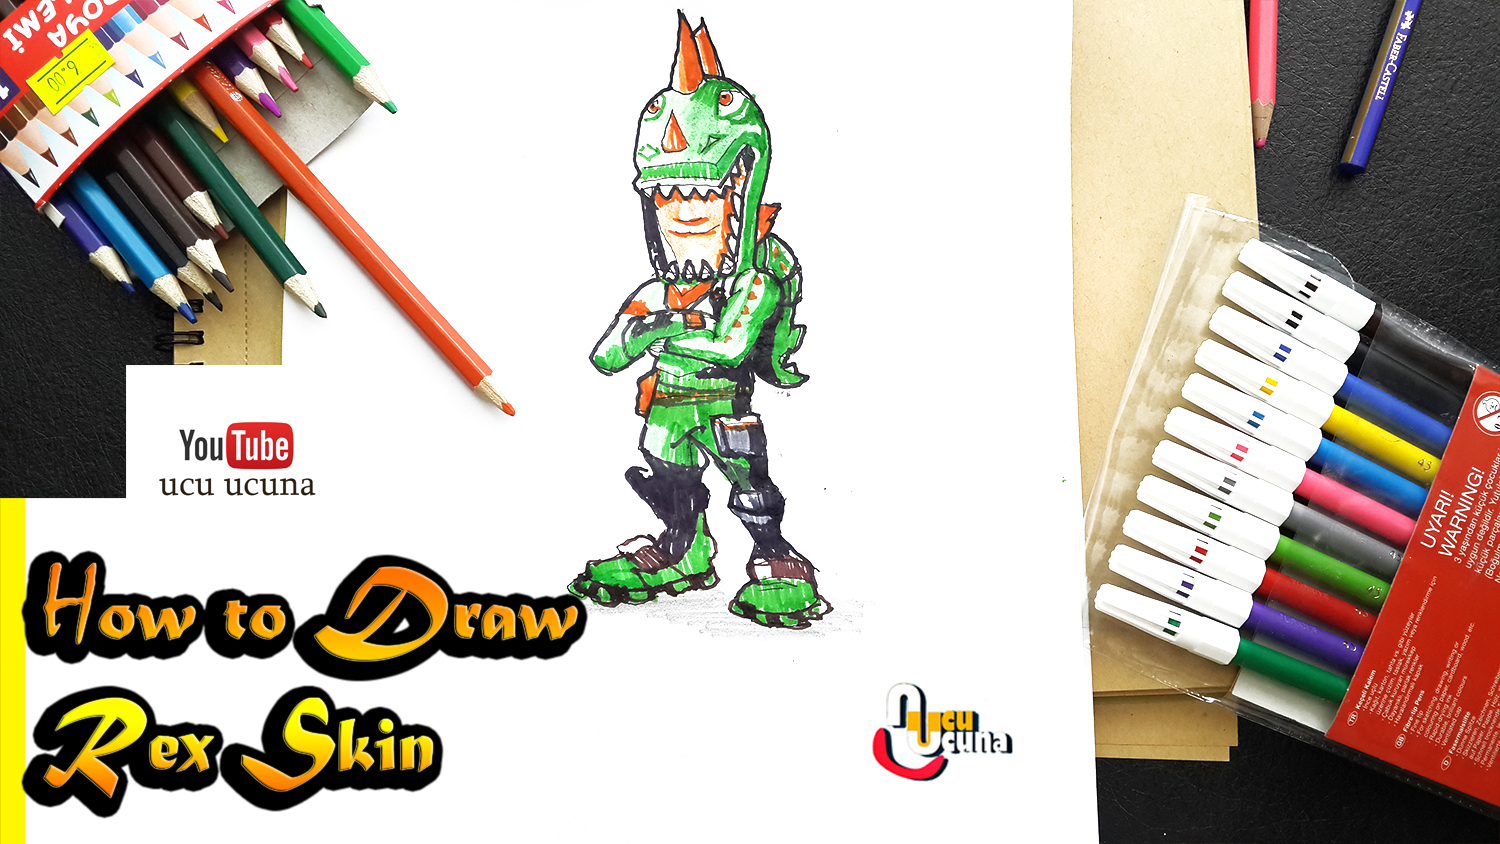 How to draw drift tutorial youtube channel name is ucu ucuna learn how to draw drift fully upragaded from fortnite step by step beginner drawing tutorial of the drift skin from fortnite